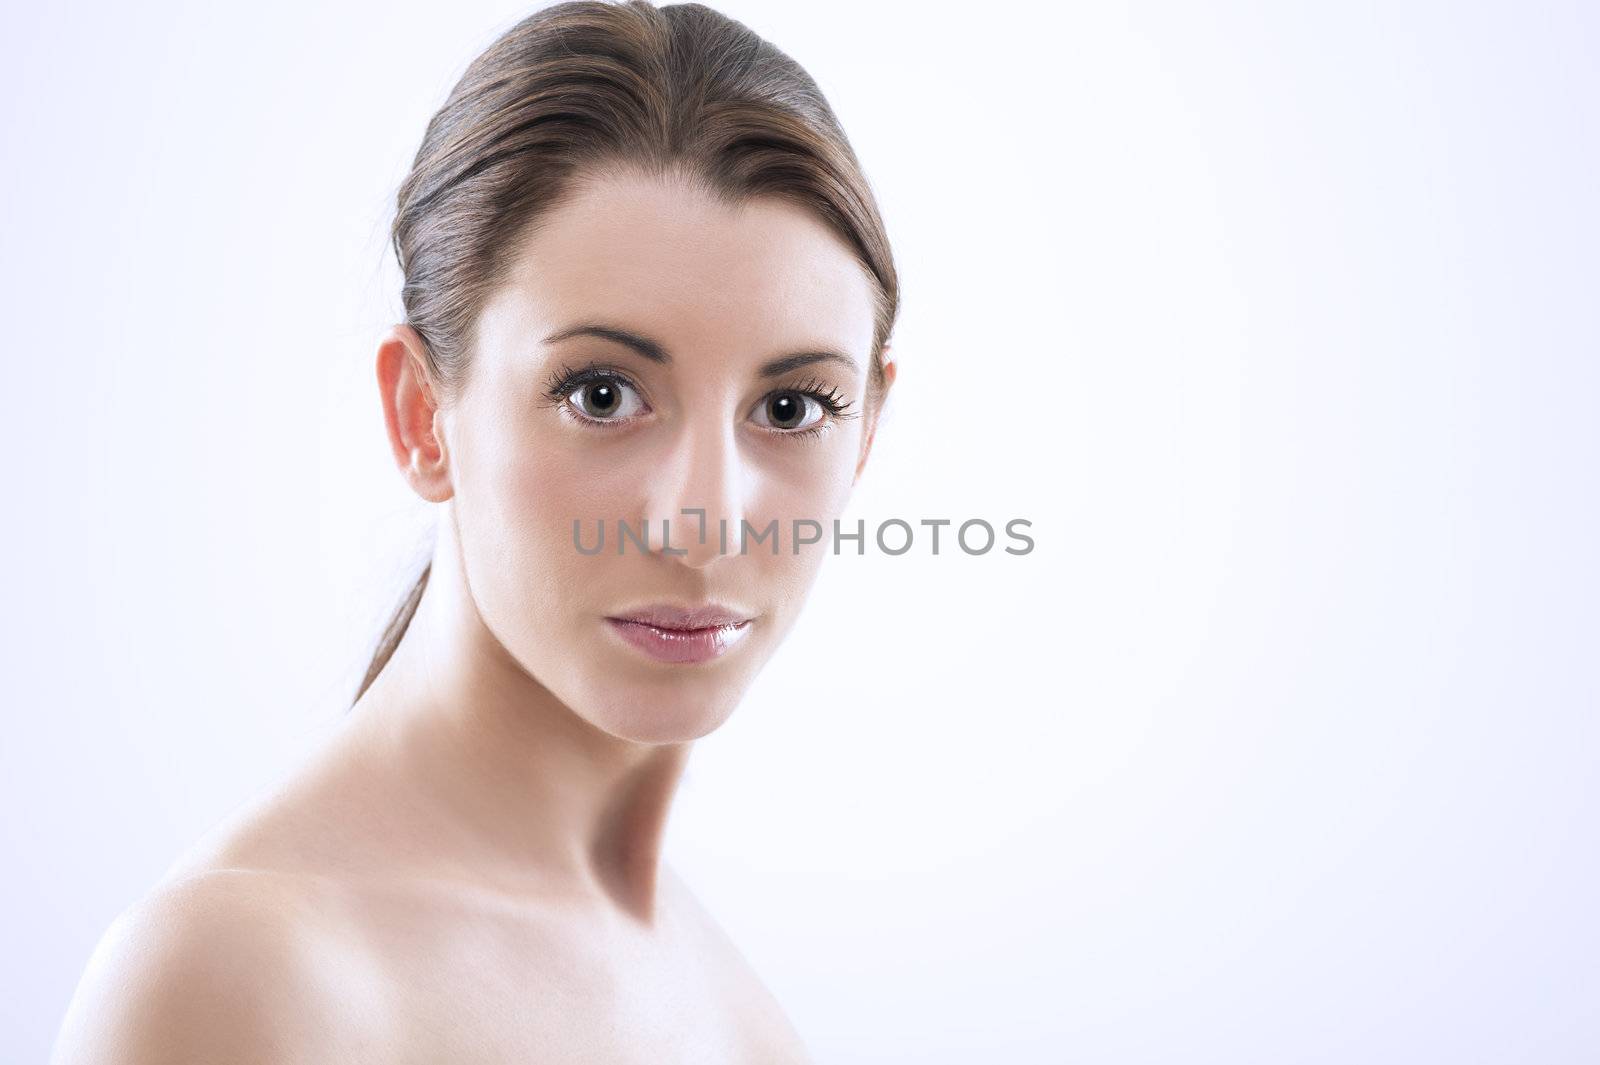 Head and shoulders studio portrait of a beautiful sexy woman with bare shoulders, a natural complexion and her hair tied back in a ponytail looking at the camera with large lustrous eyes